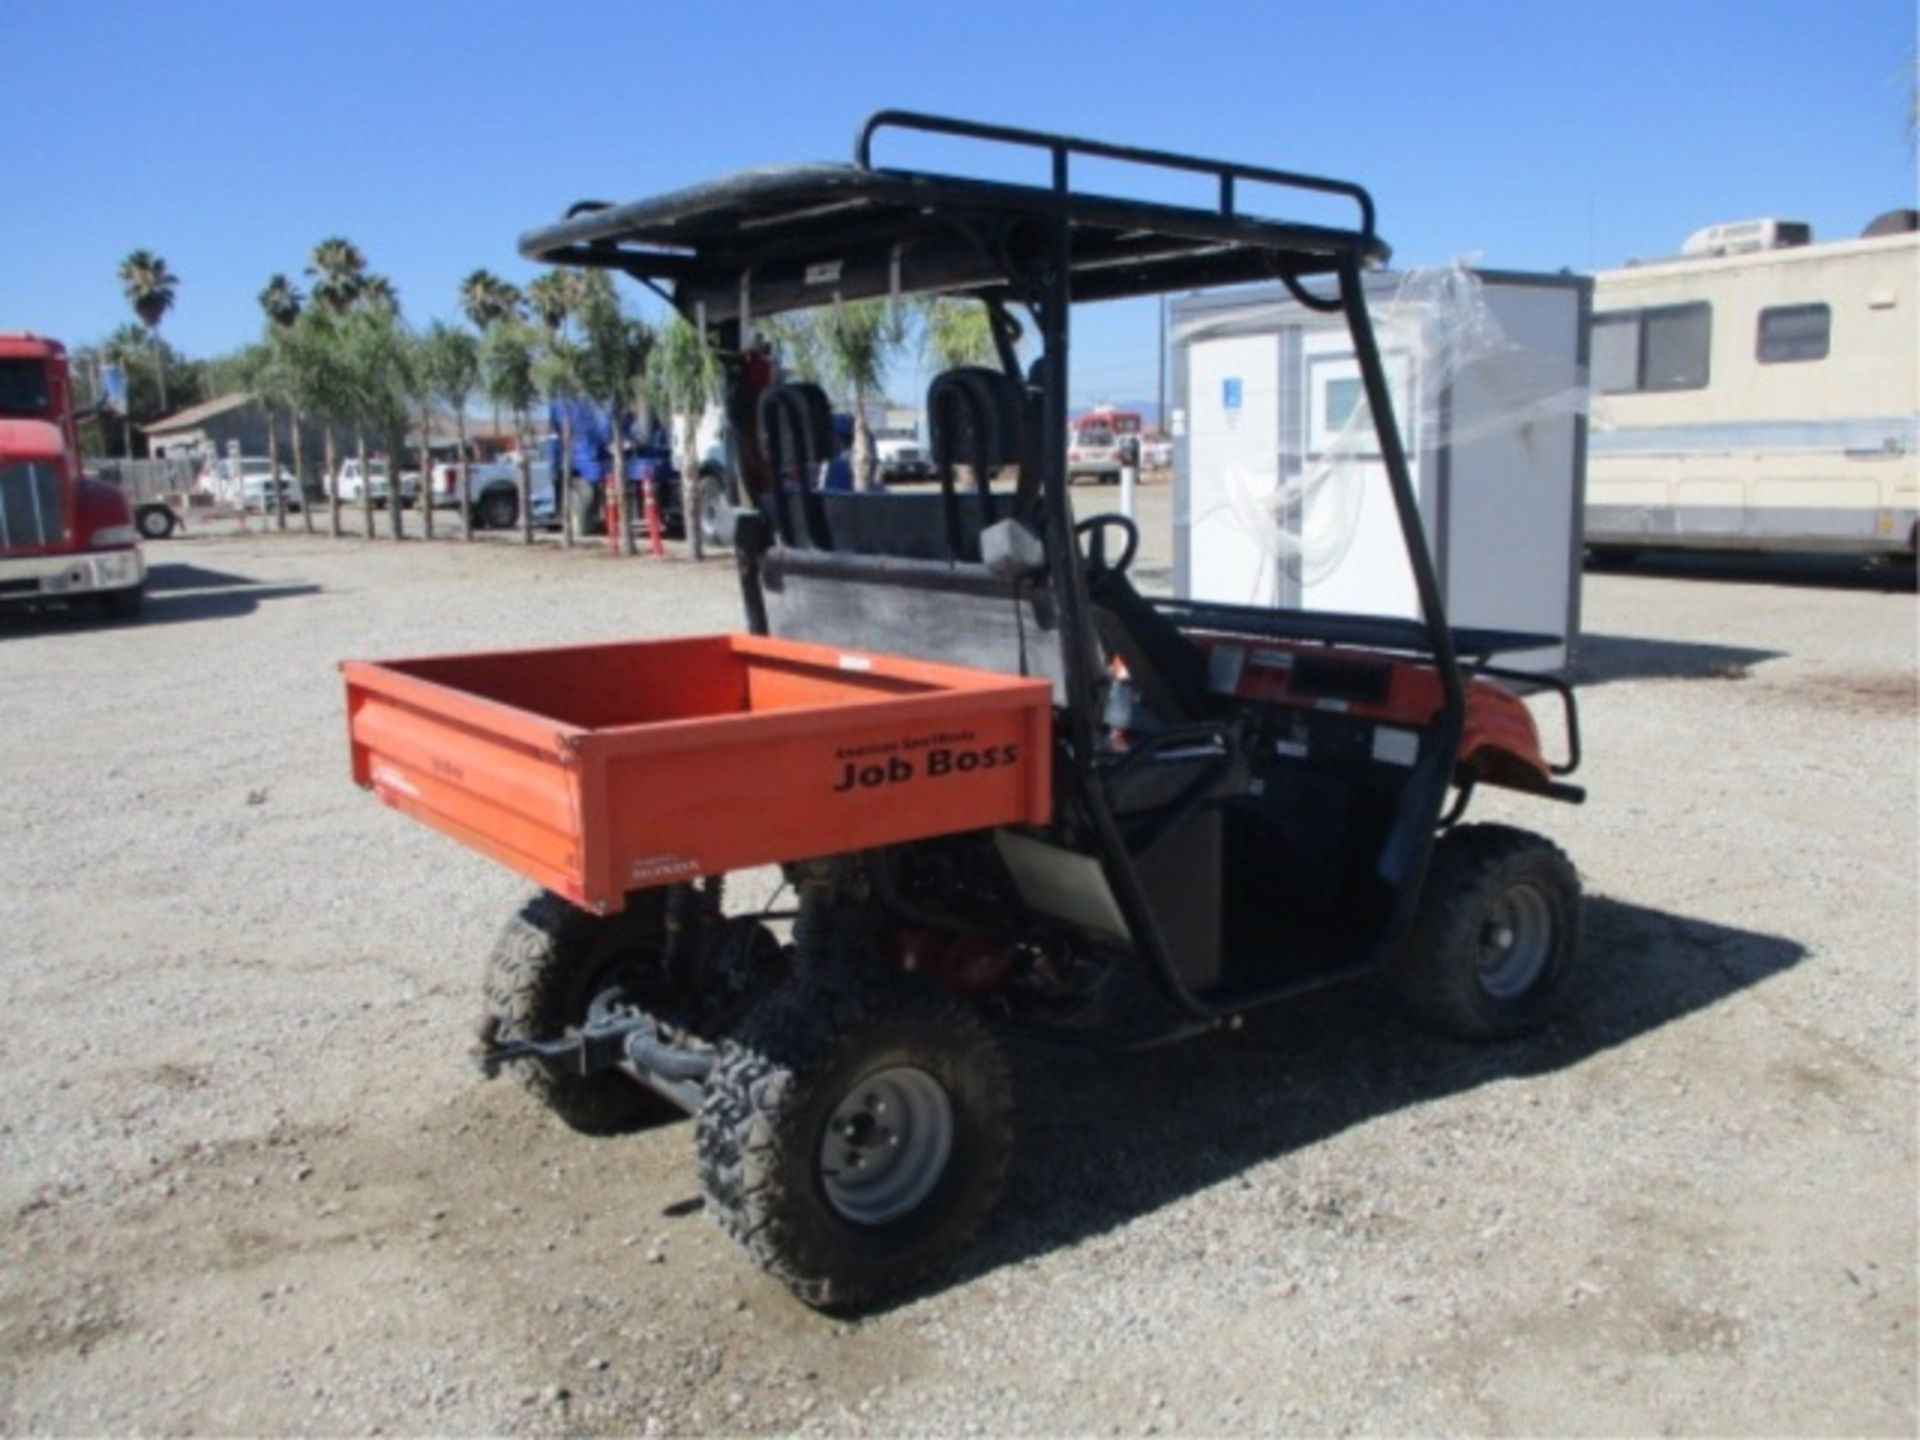 2008 American Sportworks Job Boss Utility Cart, Honda Gas, Rear Metal Dump Bed, Canopy, Tow Hitch, - Image 11 of 50